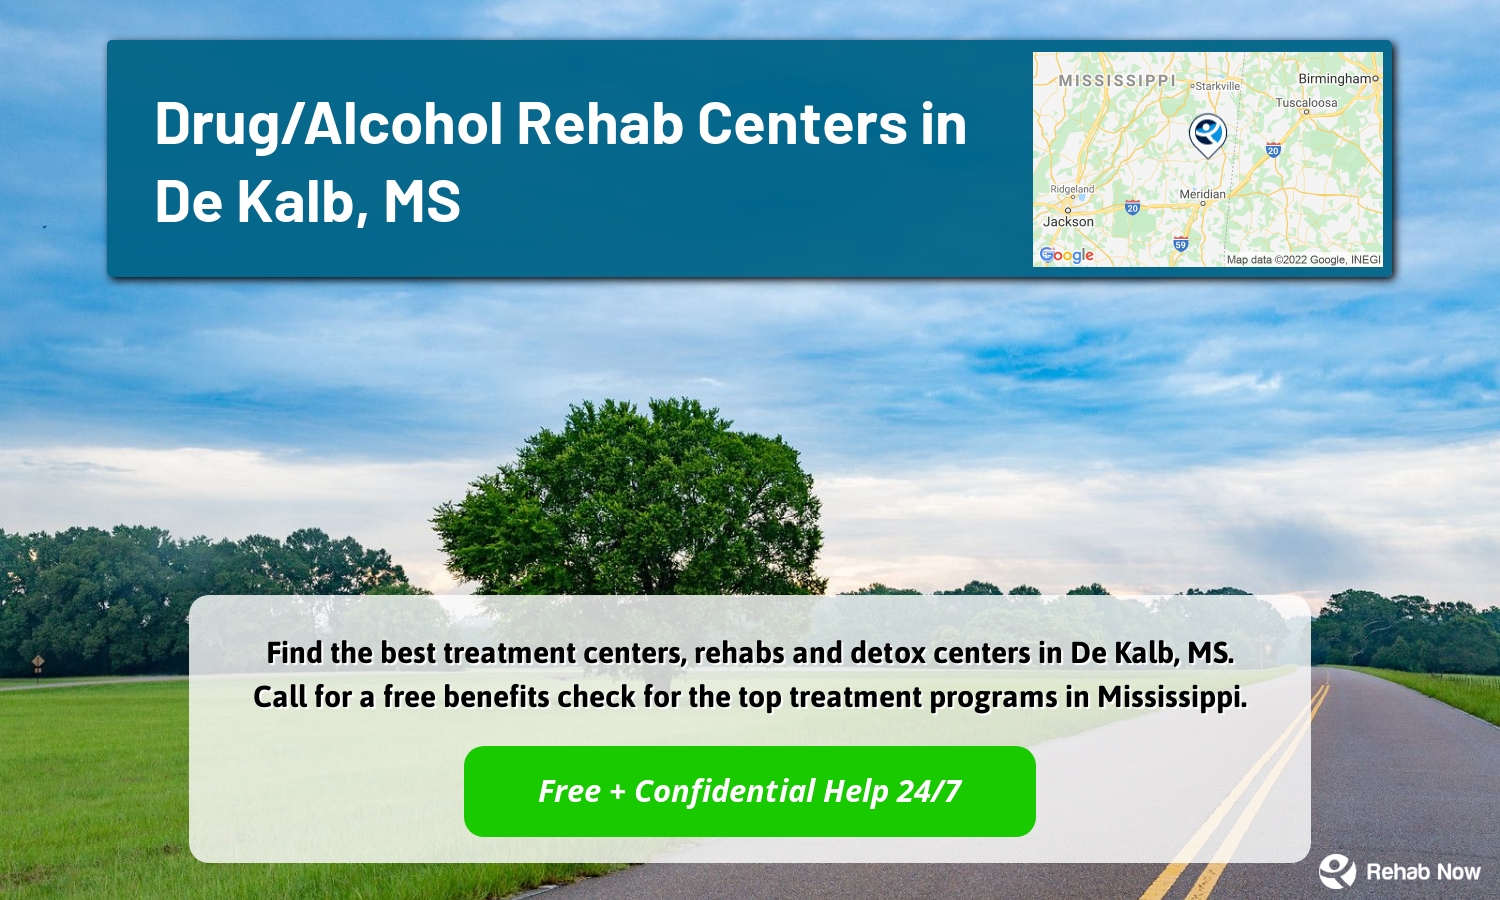 Find the best treatment centers, rehabs and detox centers in De Kalb, MS. Call for a free benefits check for the top treatment programs in Mississippi.